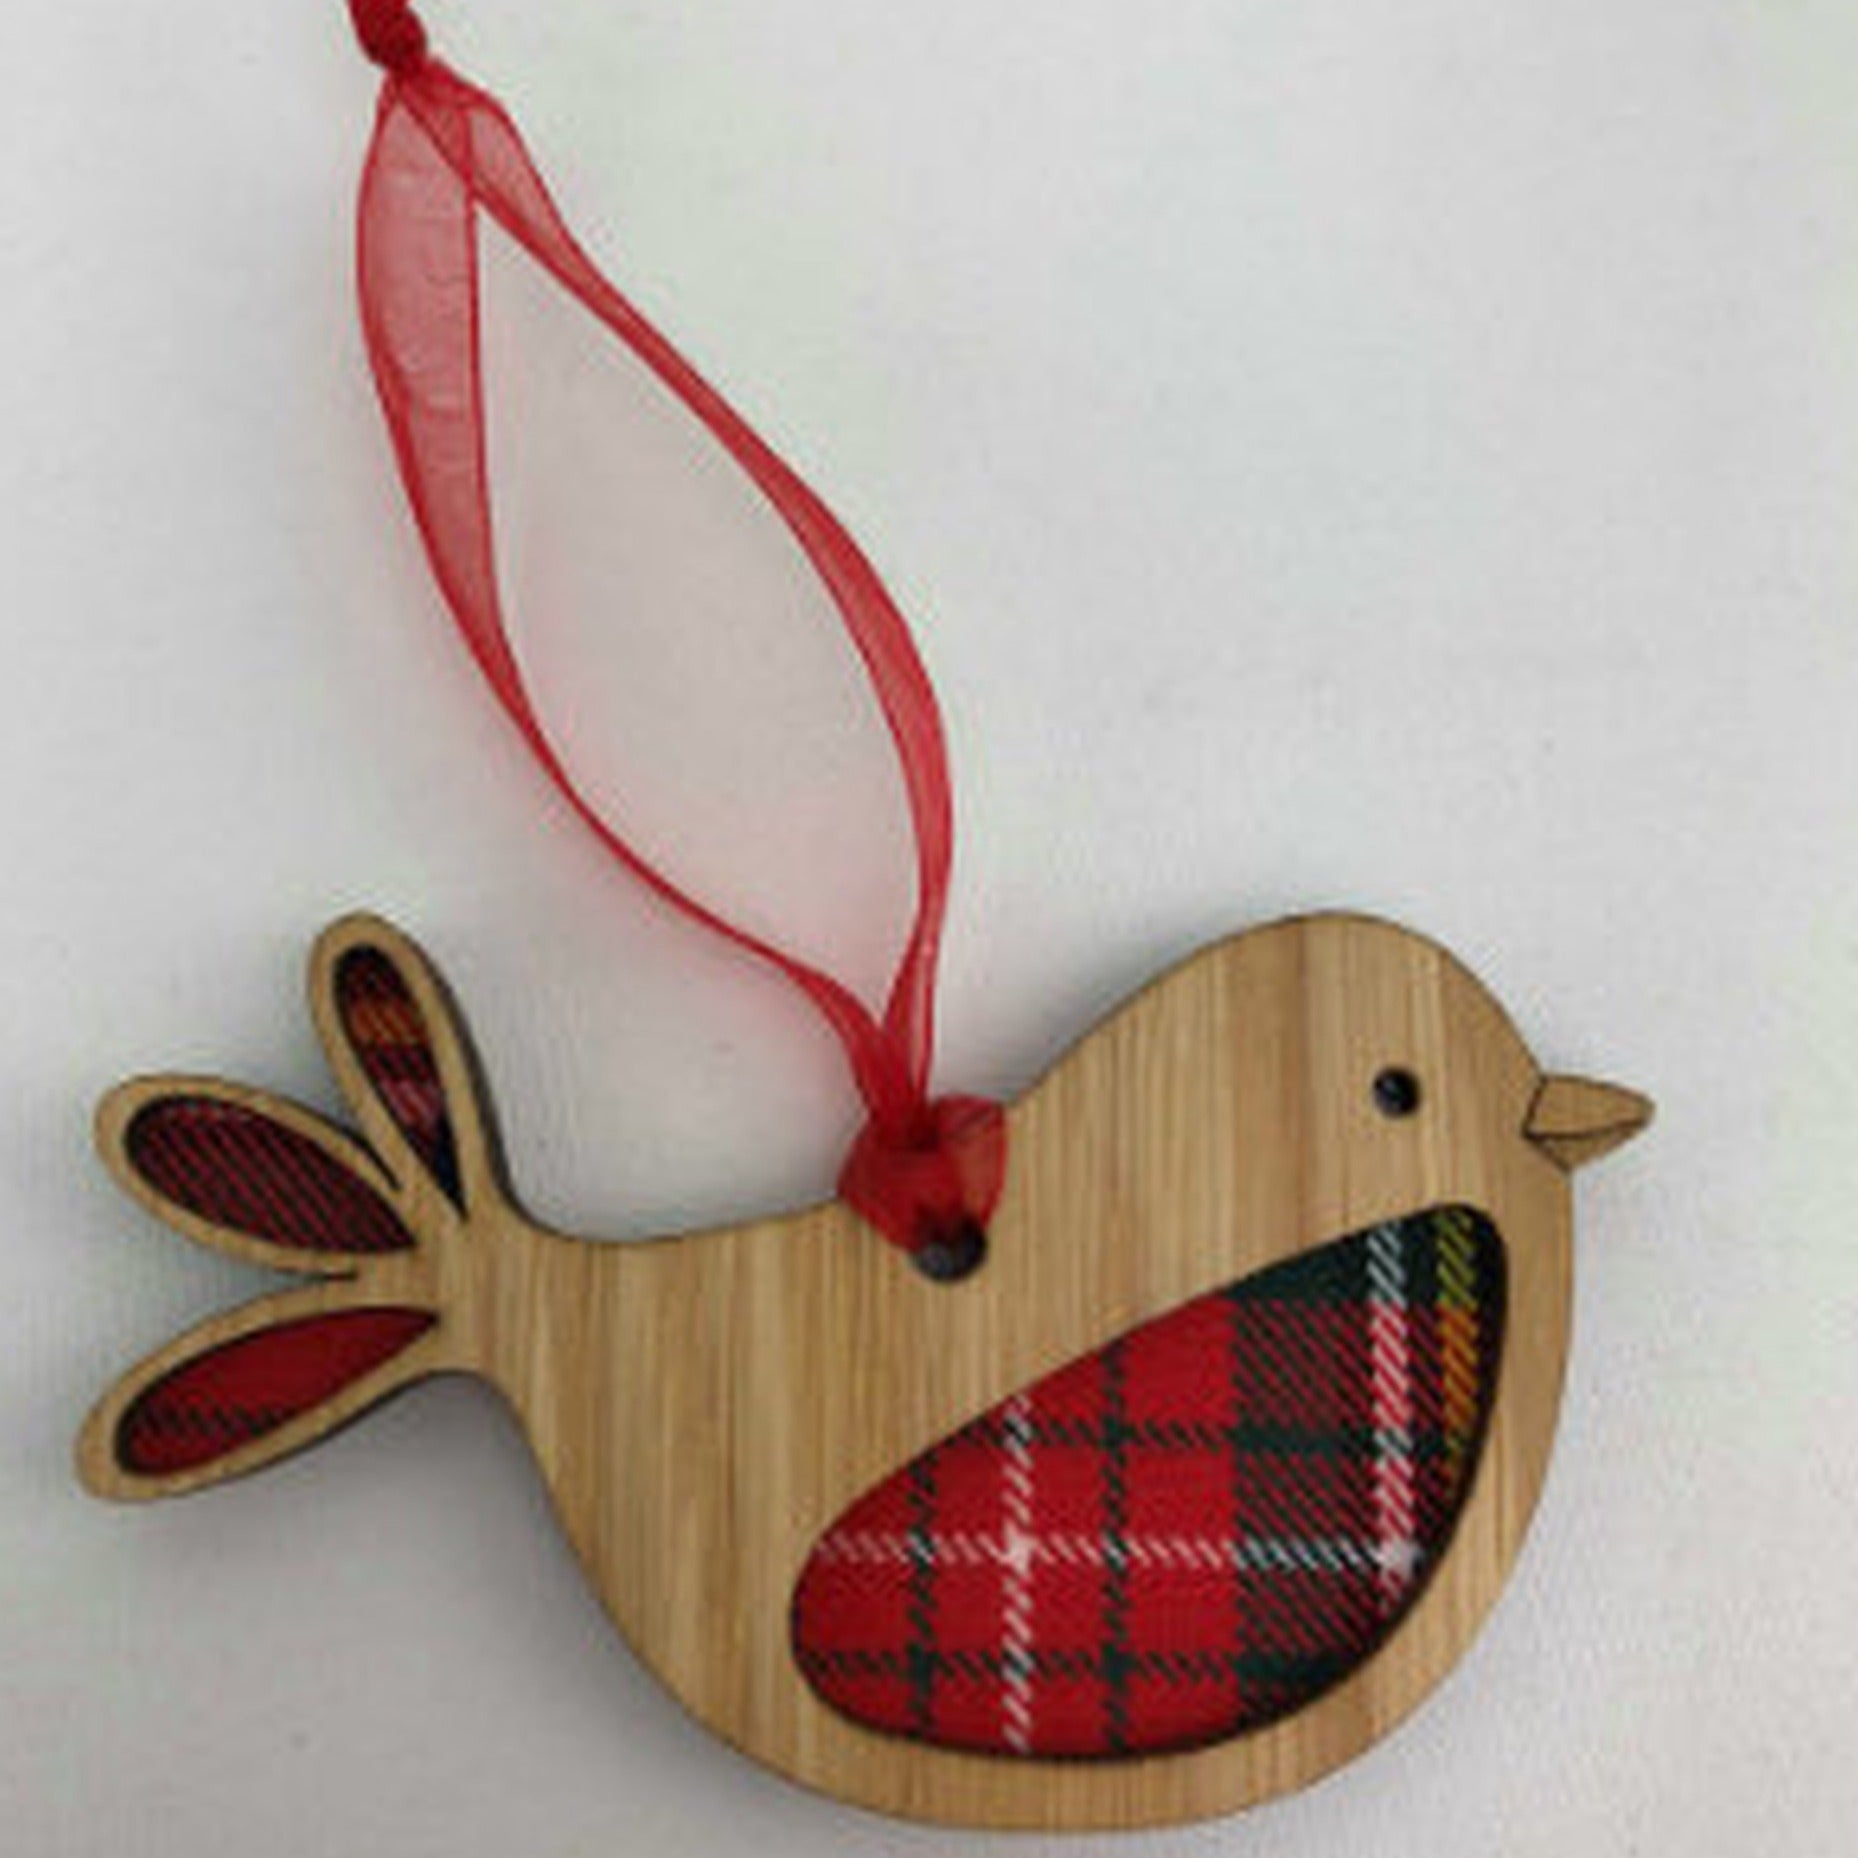 A unique keepsake Christmas decoration with a Scottish twist.  A wooden Robin with tartan inserts, mounted on card and packaged in clear cellophane packets.